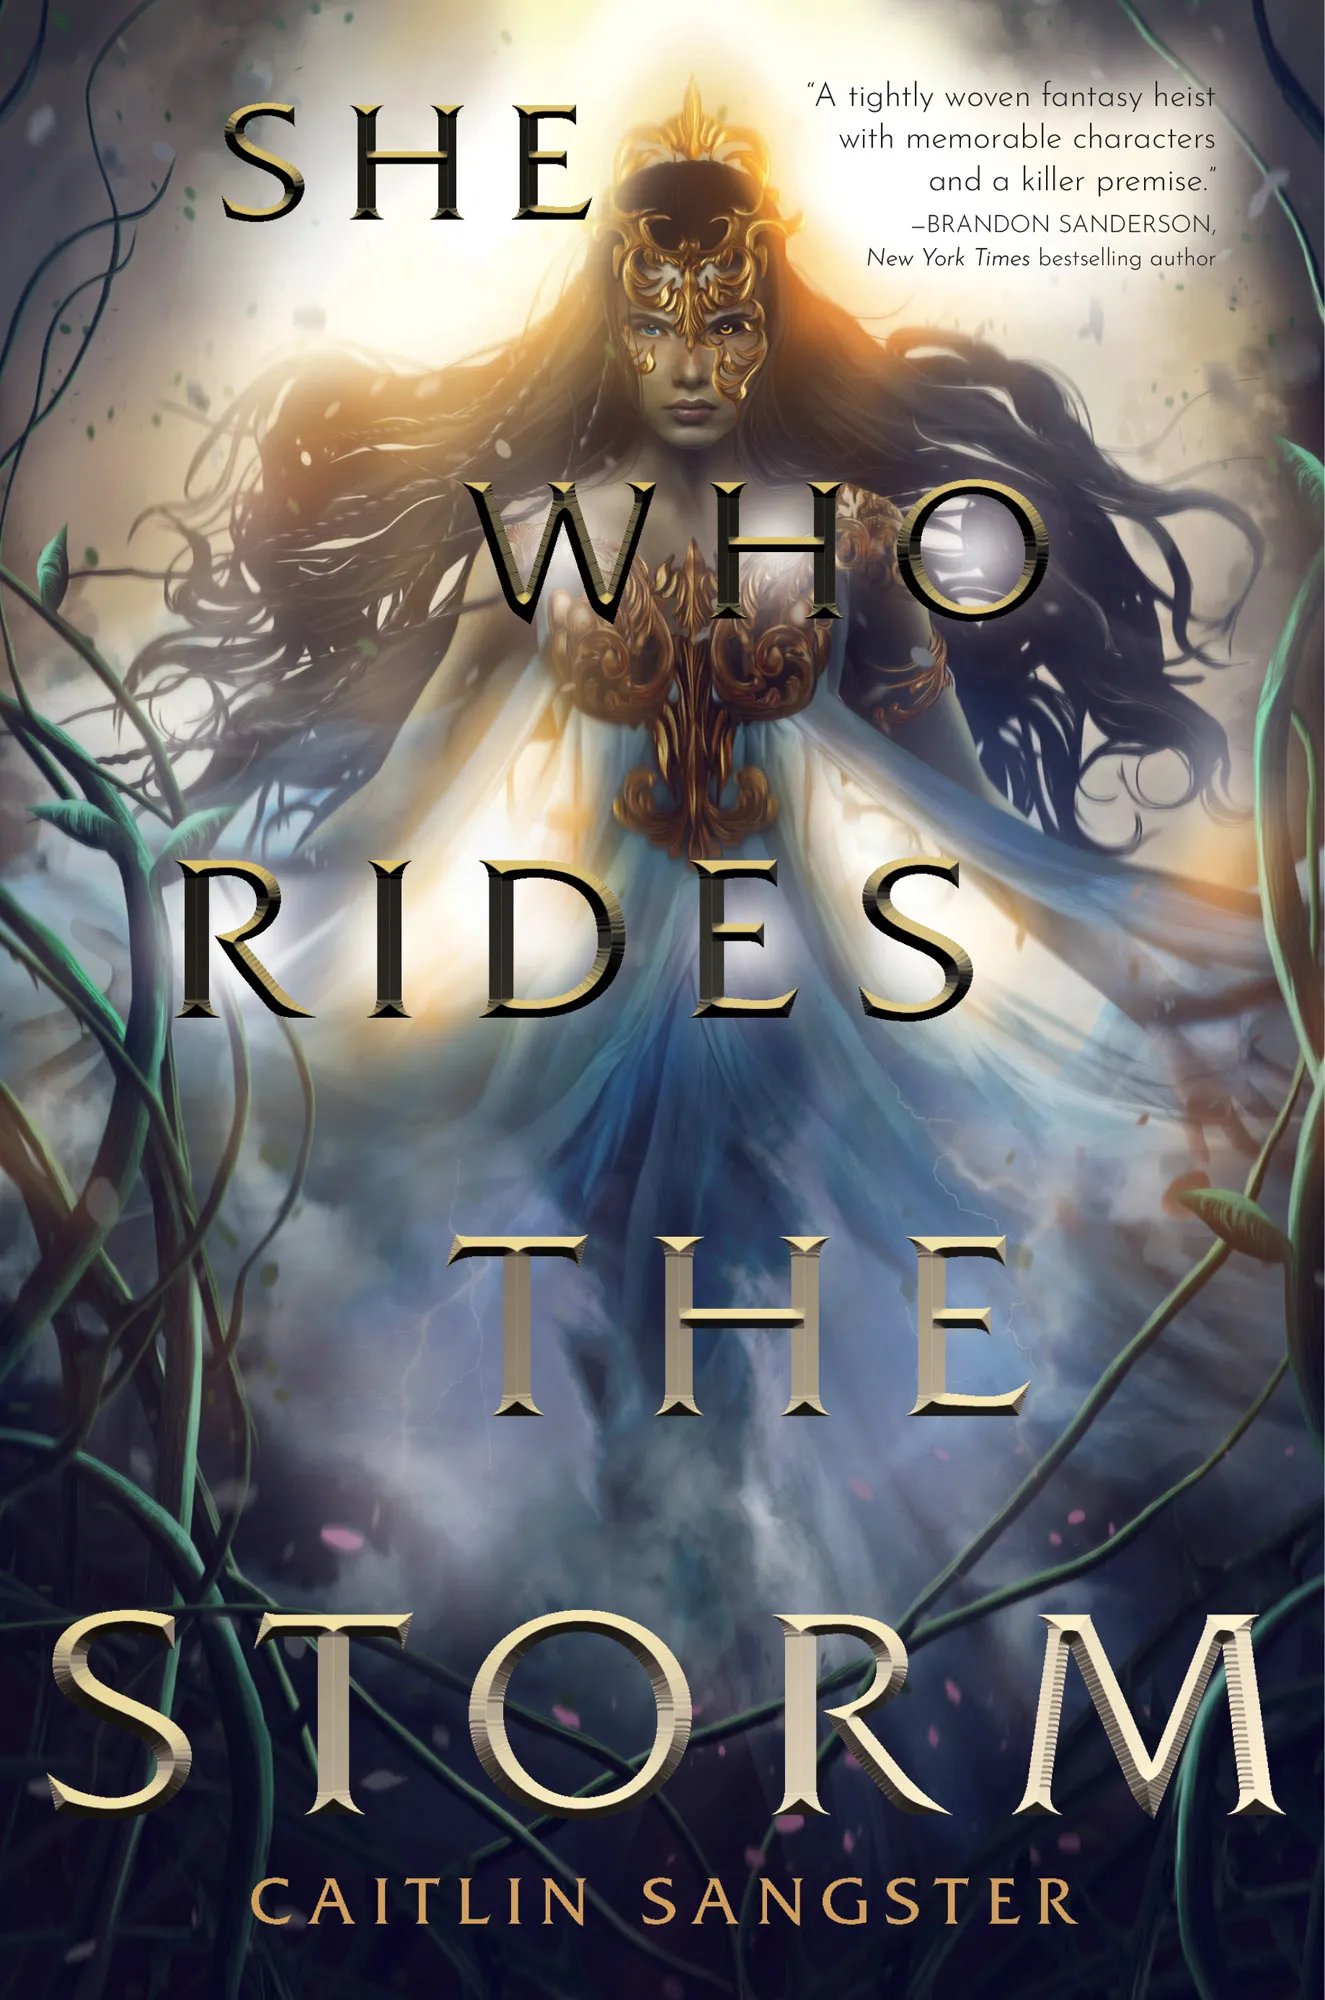 She Who Rides the Storm (The Gods-Touched Duology #1)